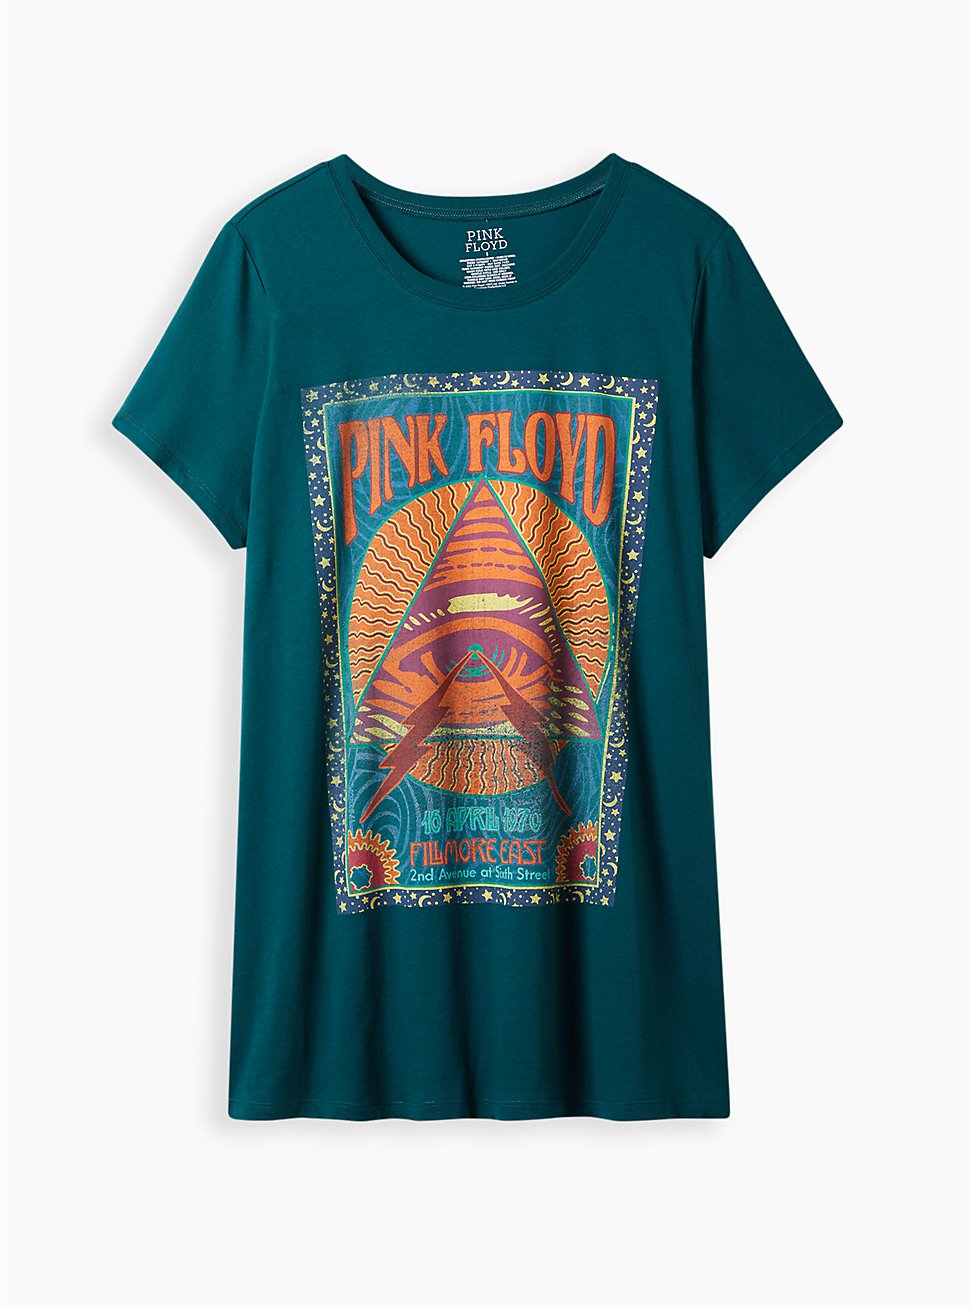 Plus Size Classic Fit Tunic Tee - Pink Floyd Teal, TEAL, hi-res